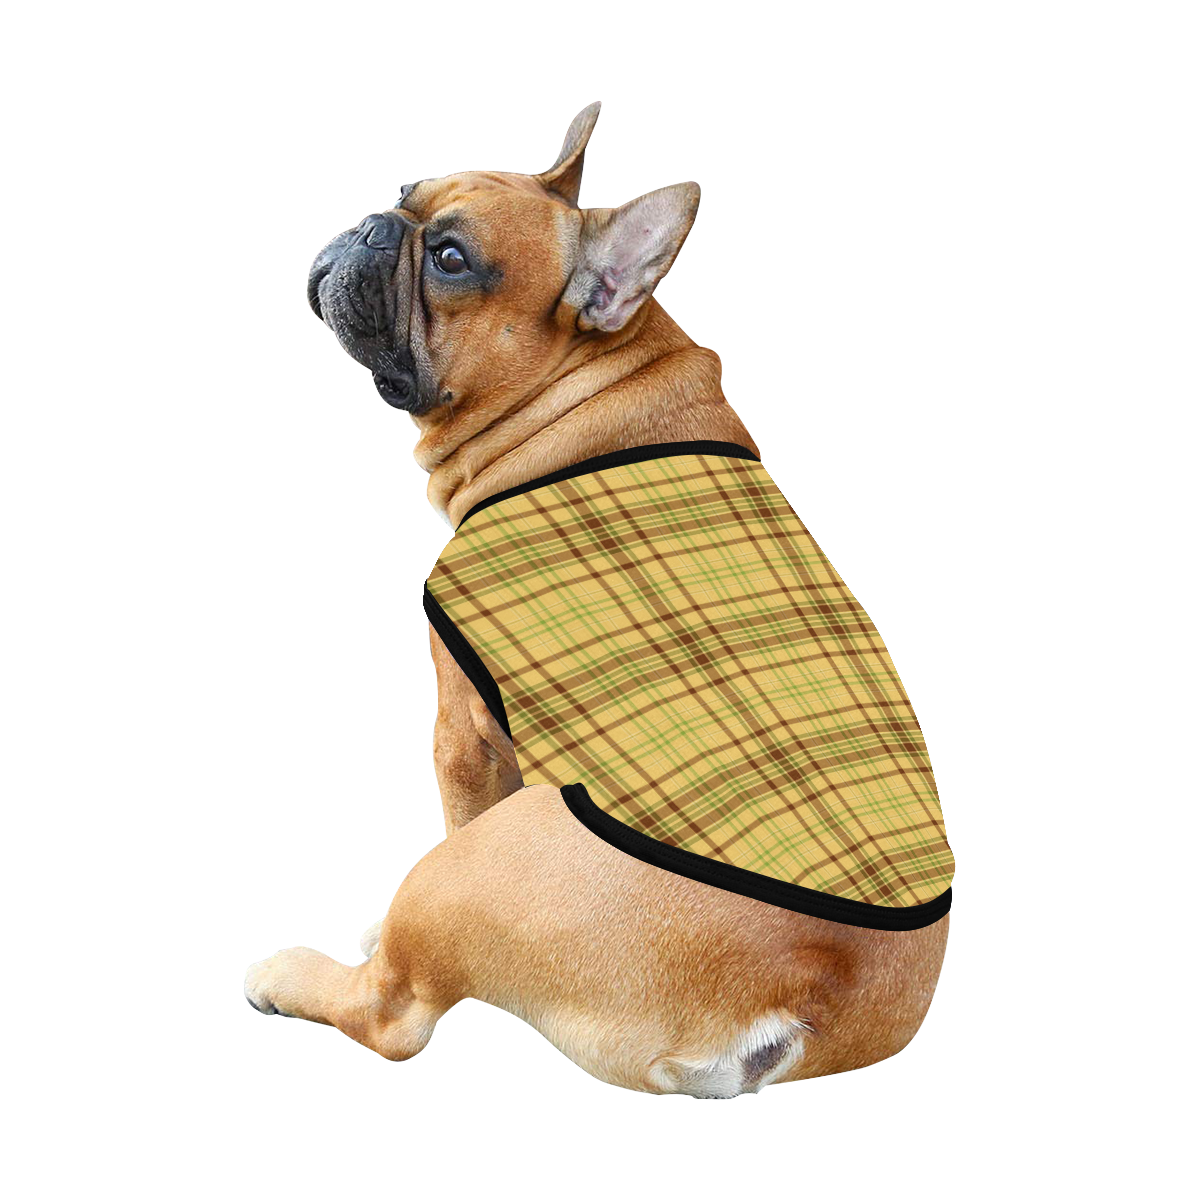 Yellow Brown Plaid All Over Print Pet Tank Top